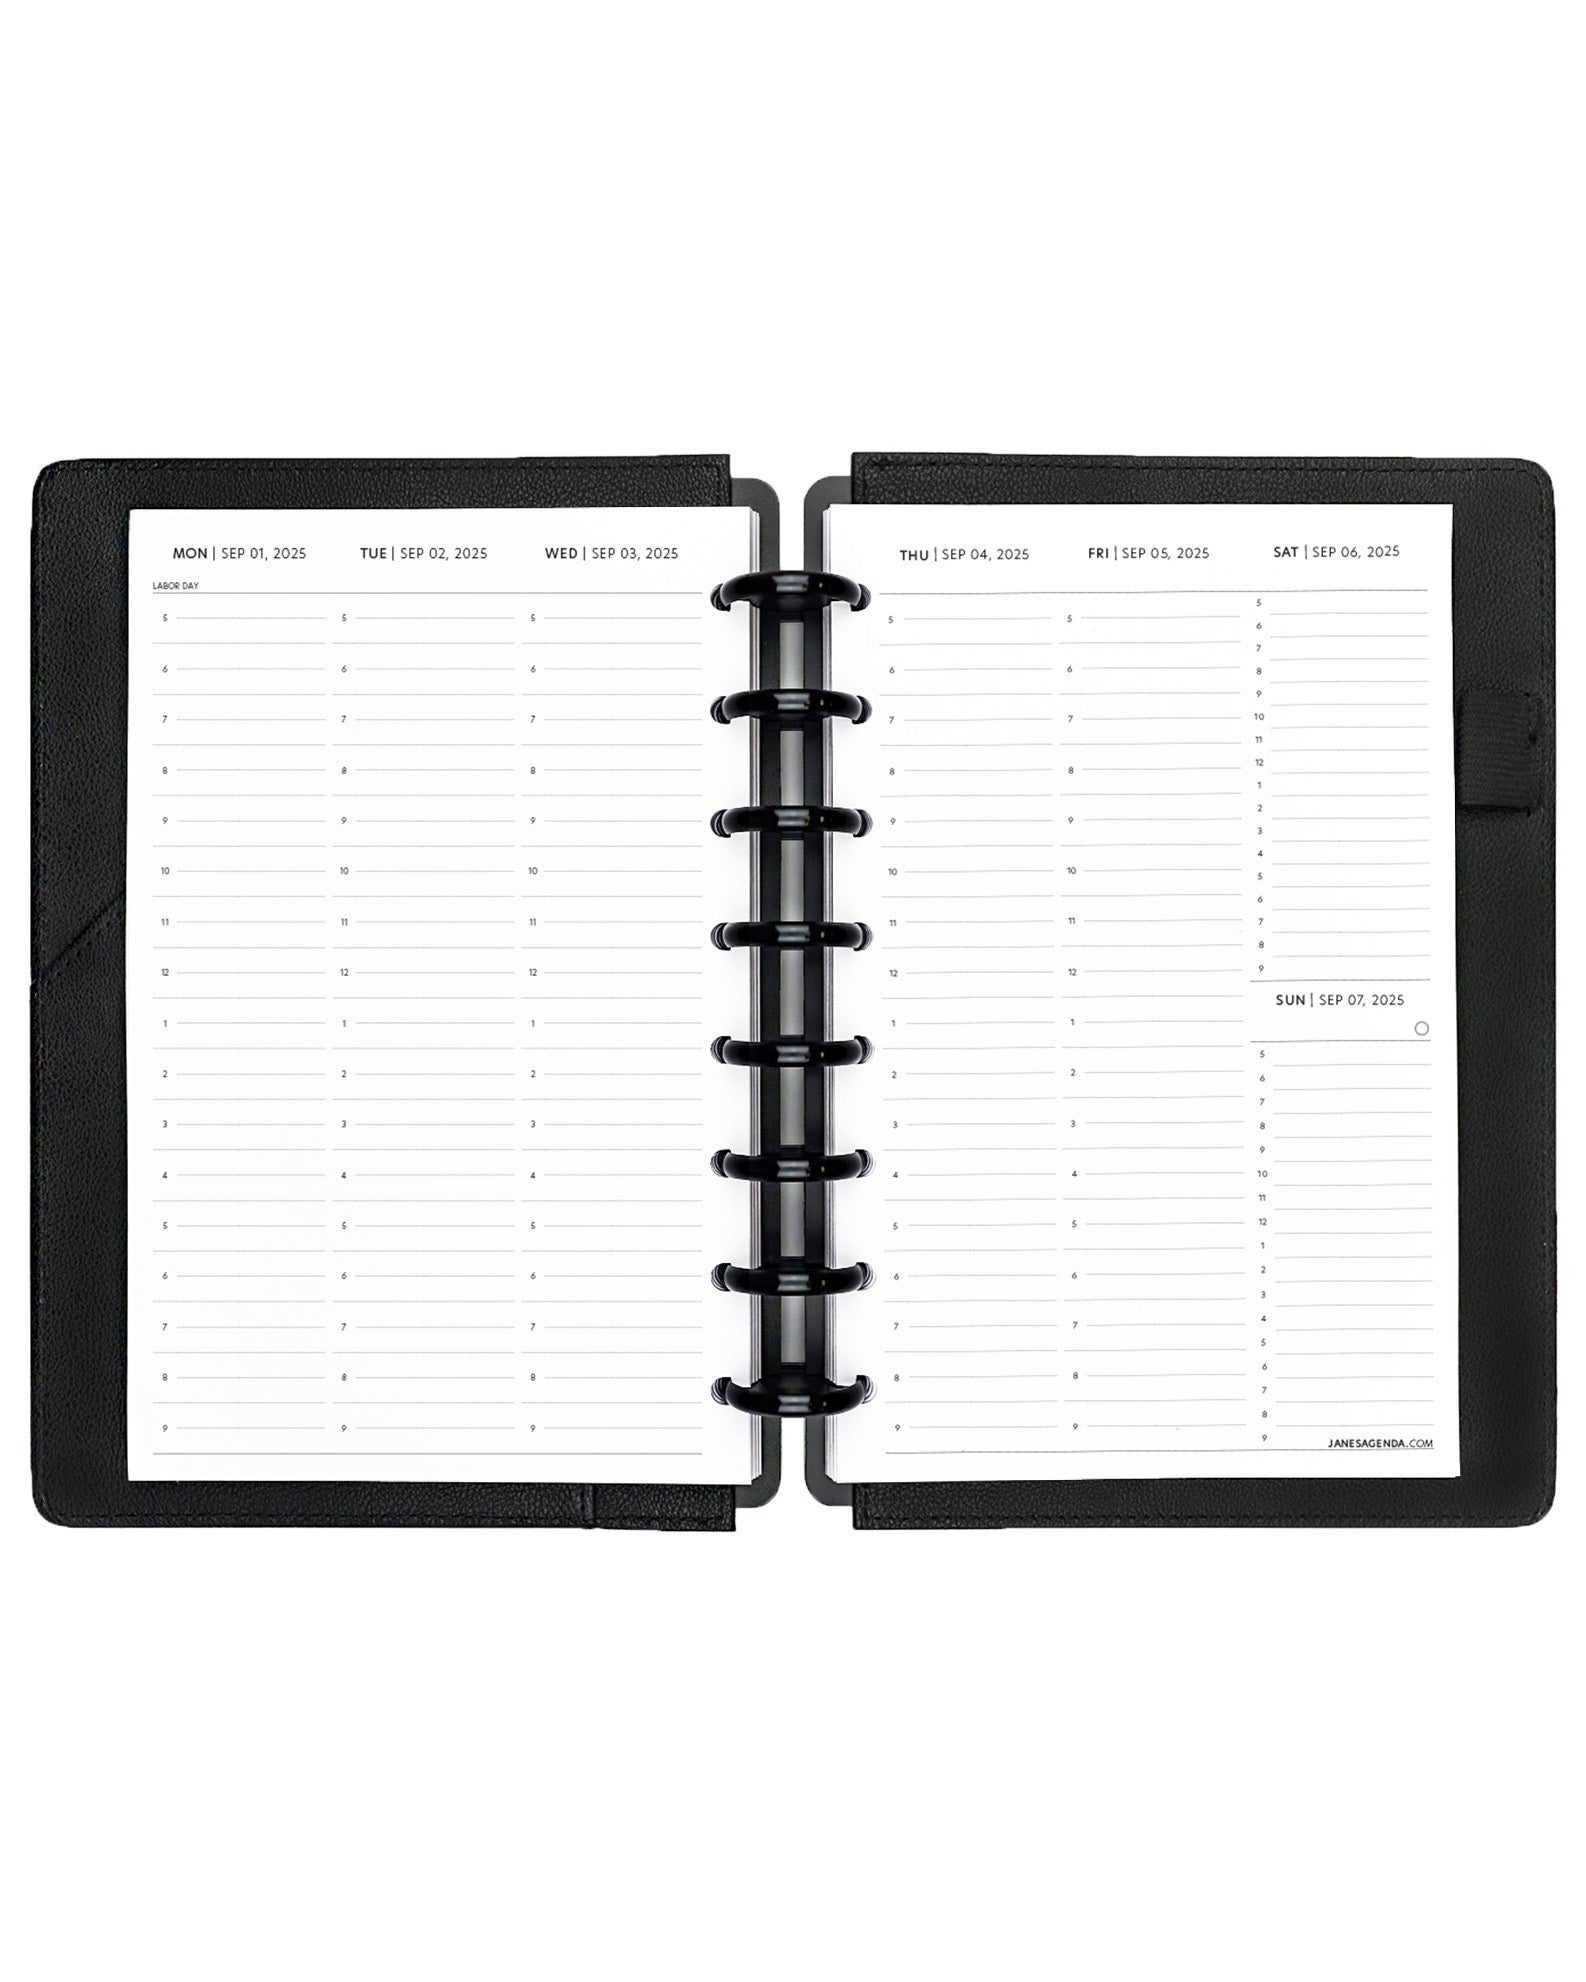 Weekly planner inserts refill pages for discbound planners, disc notebooks, and A5 ringbound planner binder systems by Jane's Agenda.